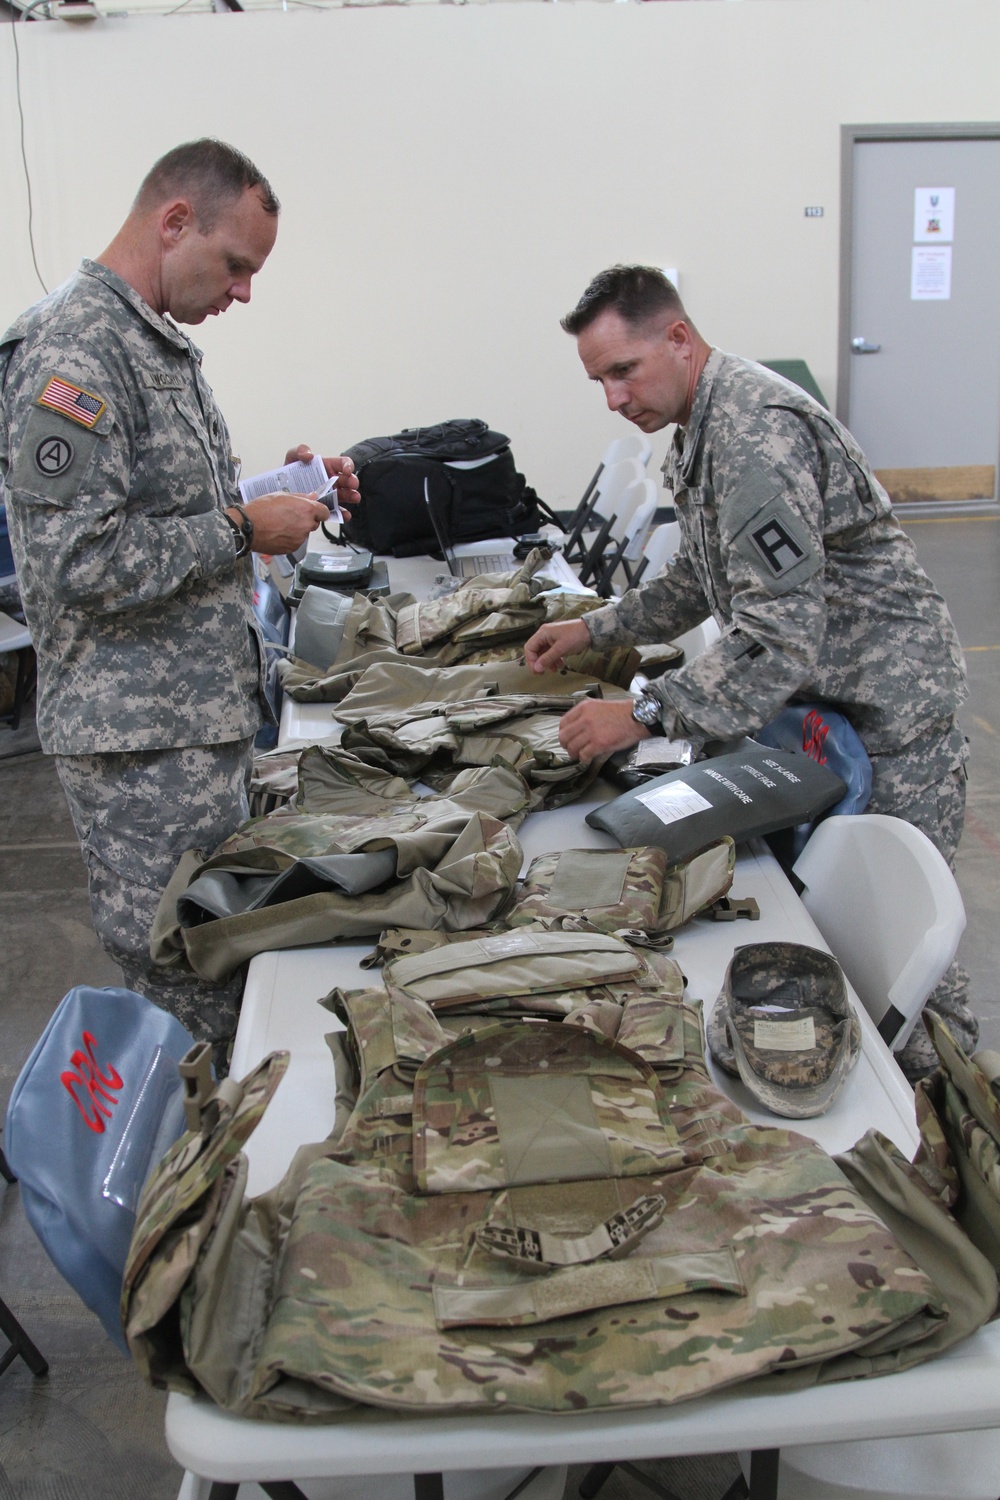 Army reserve soldiers deploy to Kuwait, support 3rd Army.